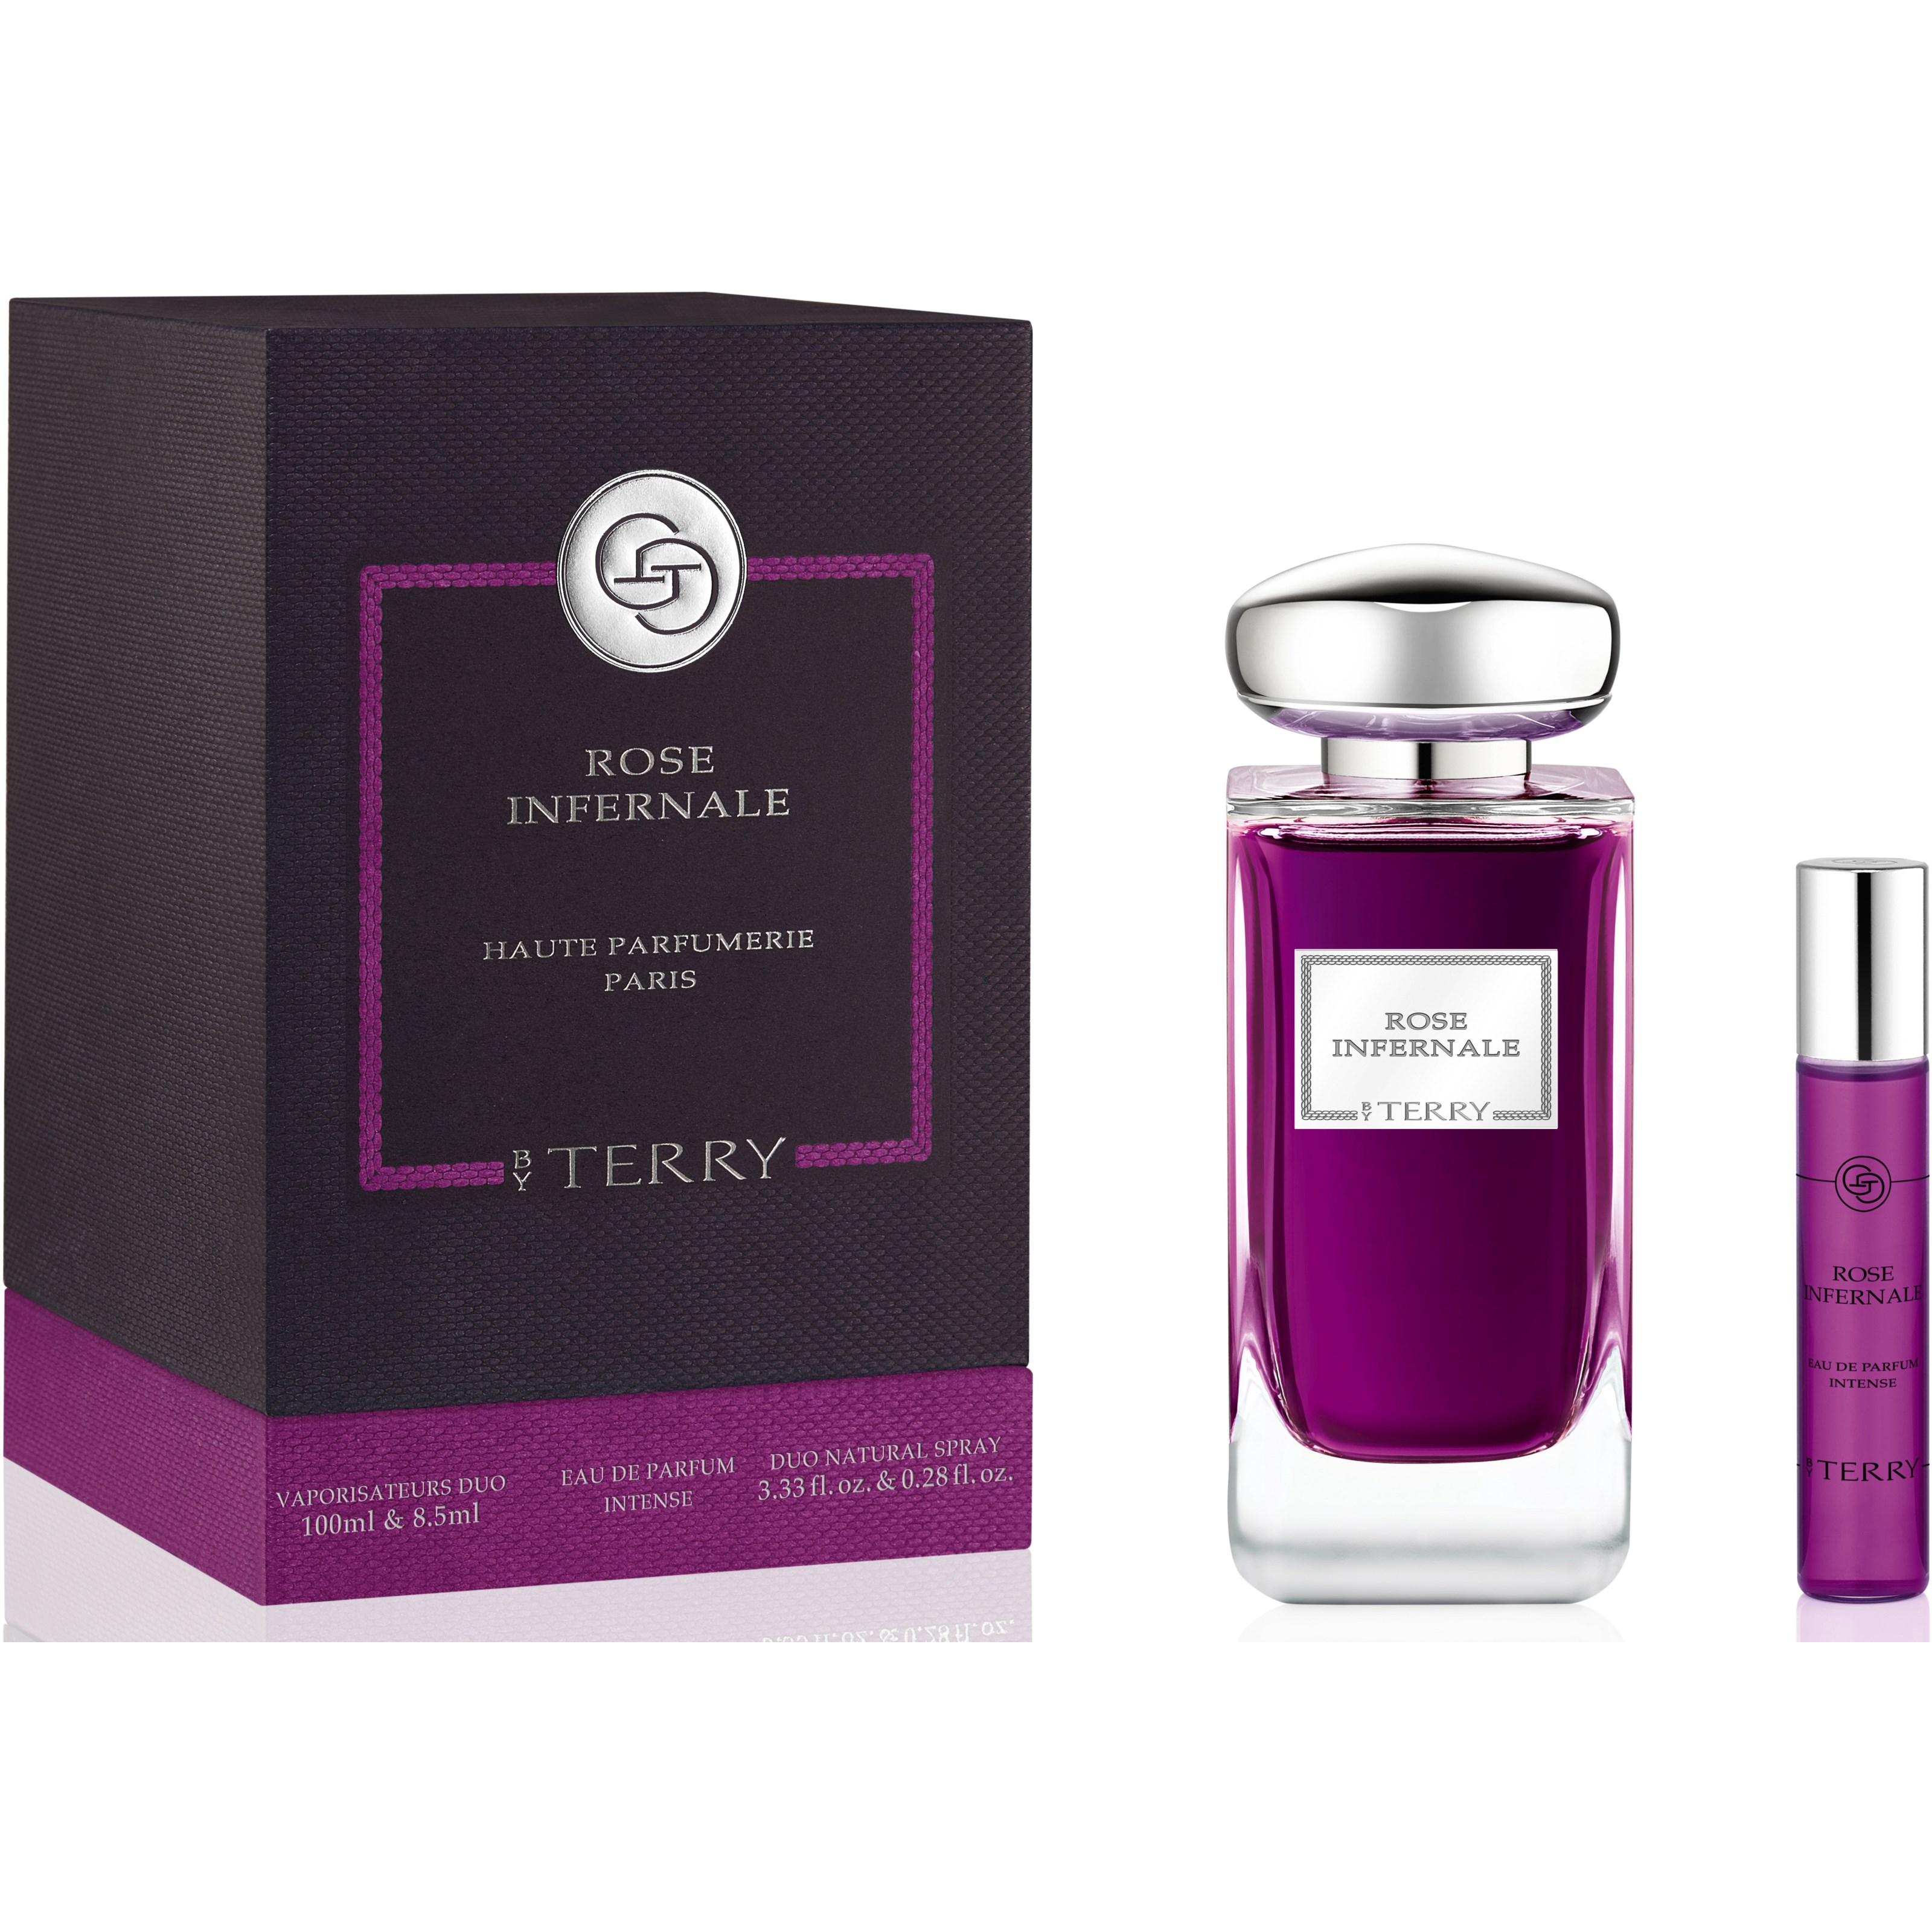 By Terry Perfume Collection Rose Infernale 108 ml